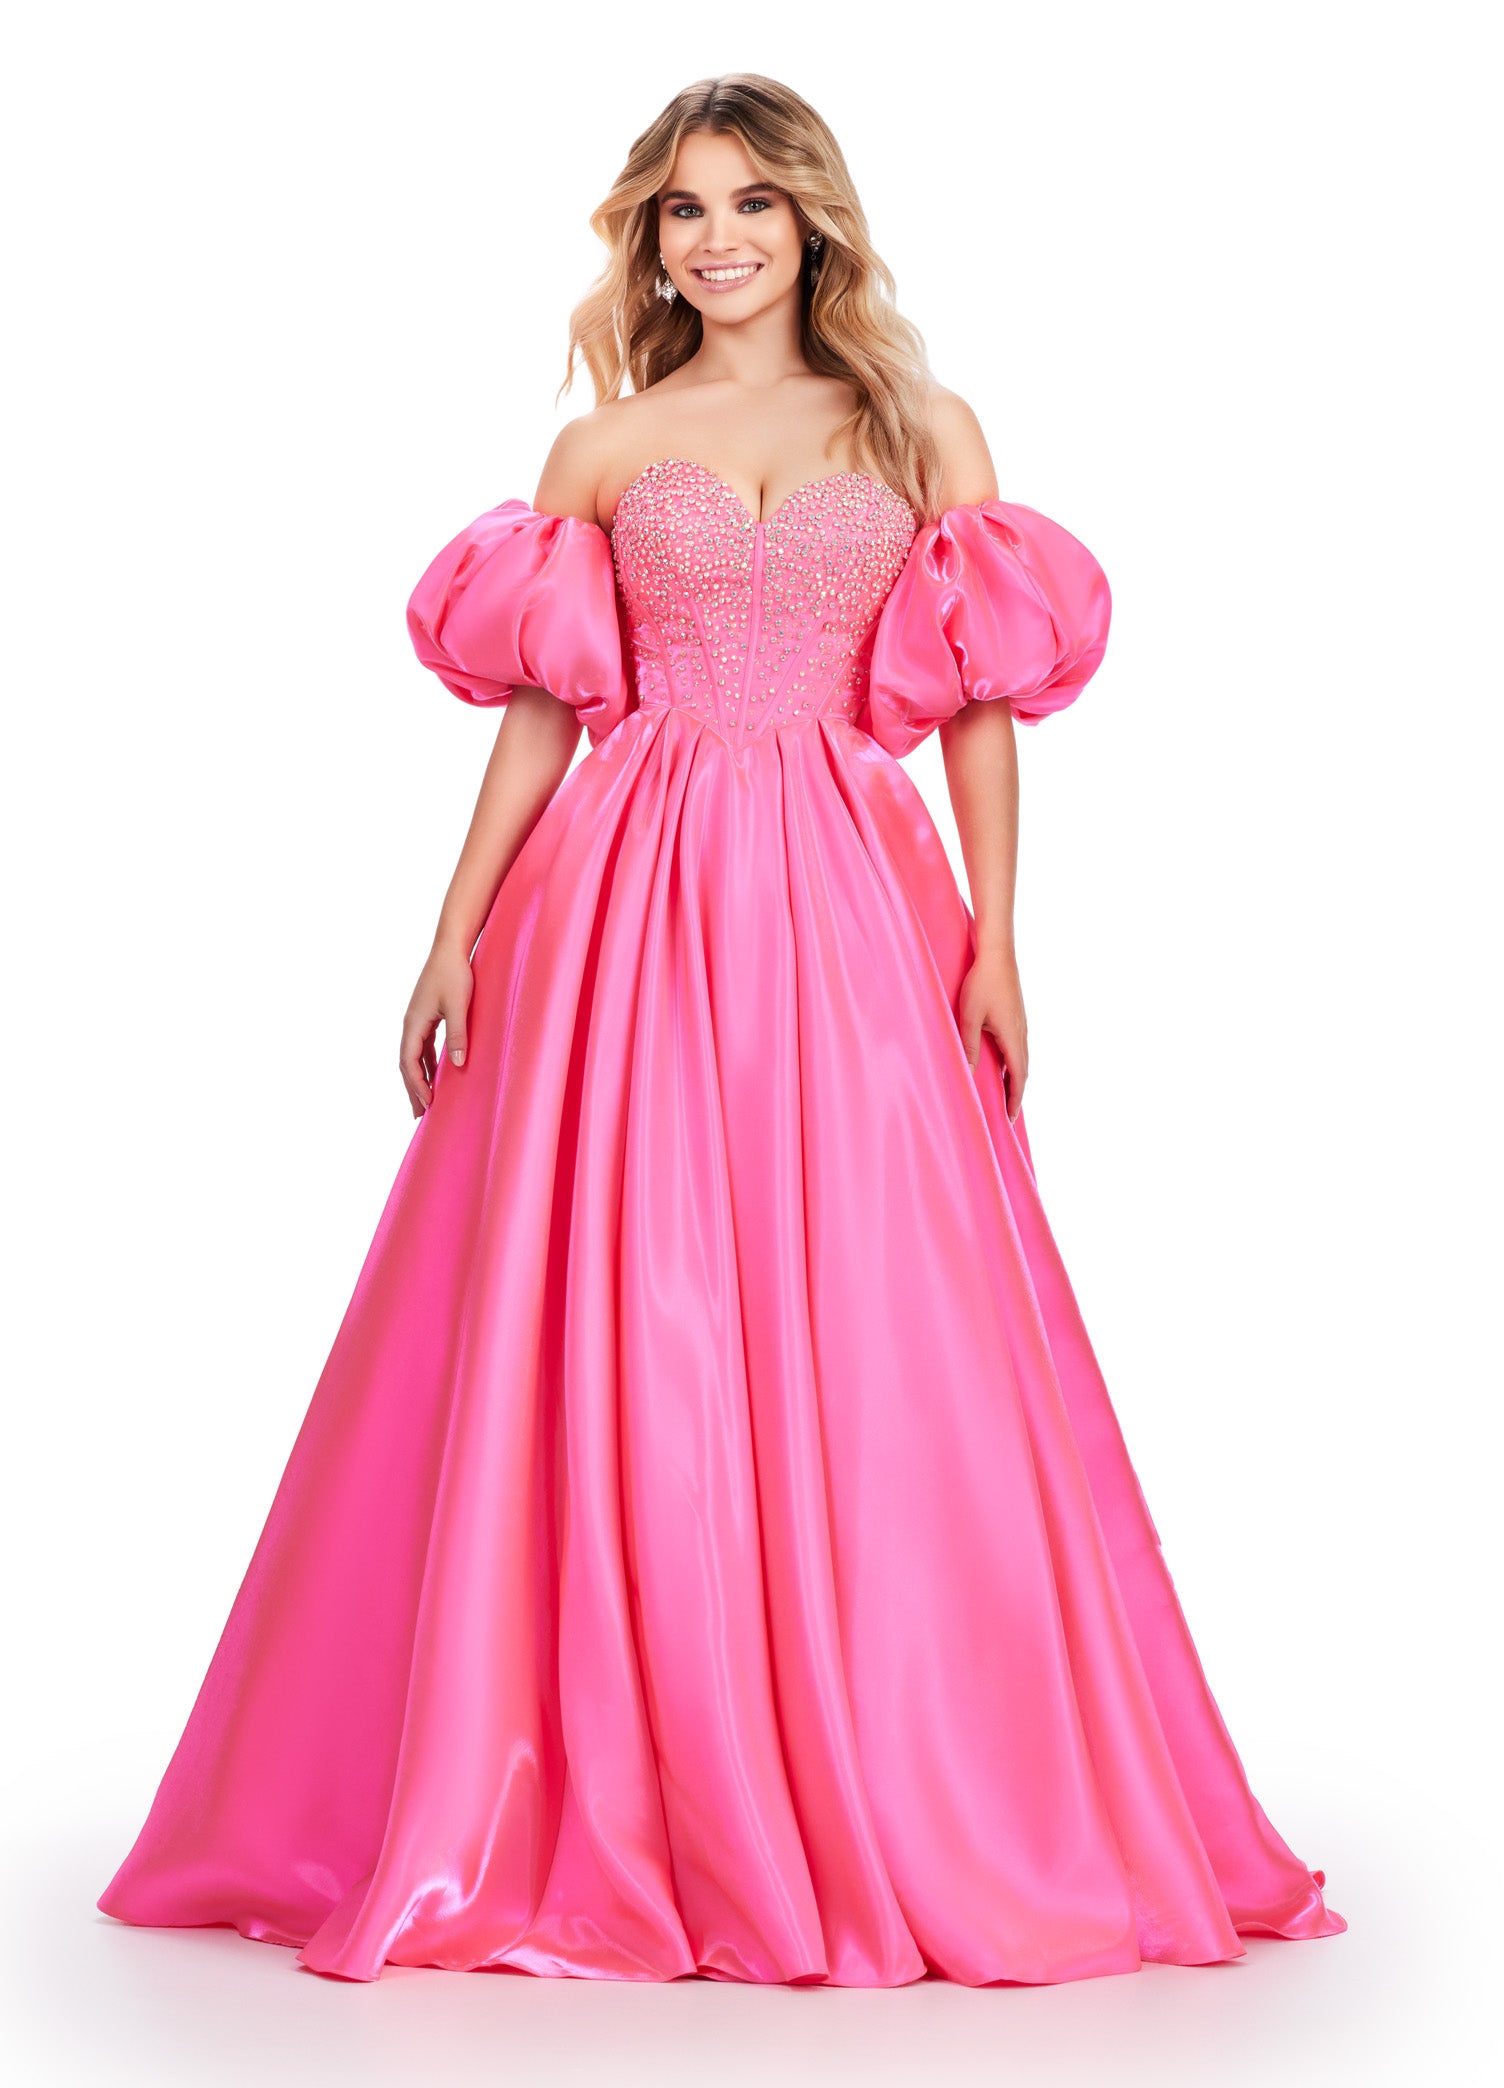 Fuchsia Princess A Line Off the Shoulder Corset Prom Dress with Lace R